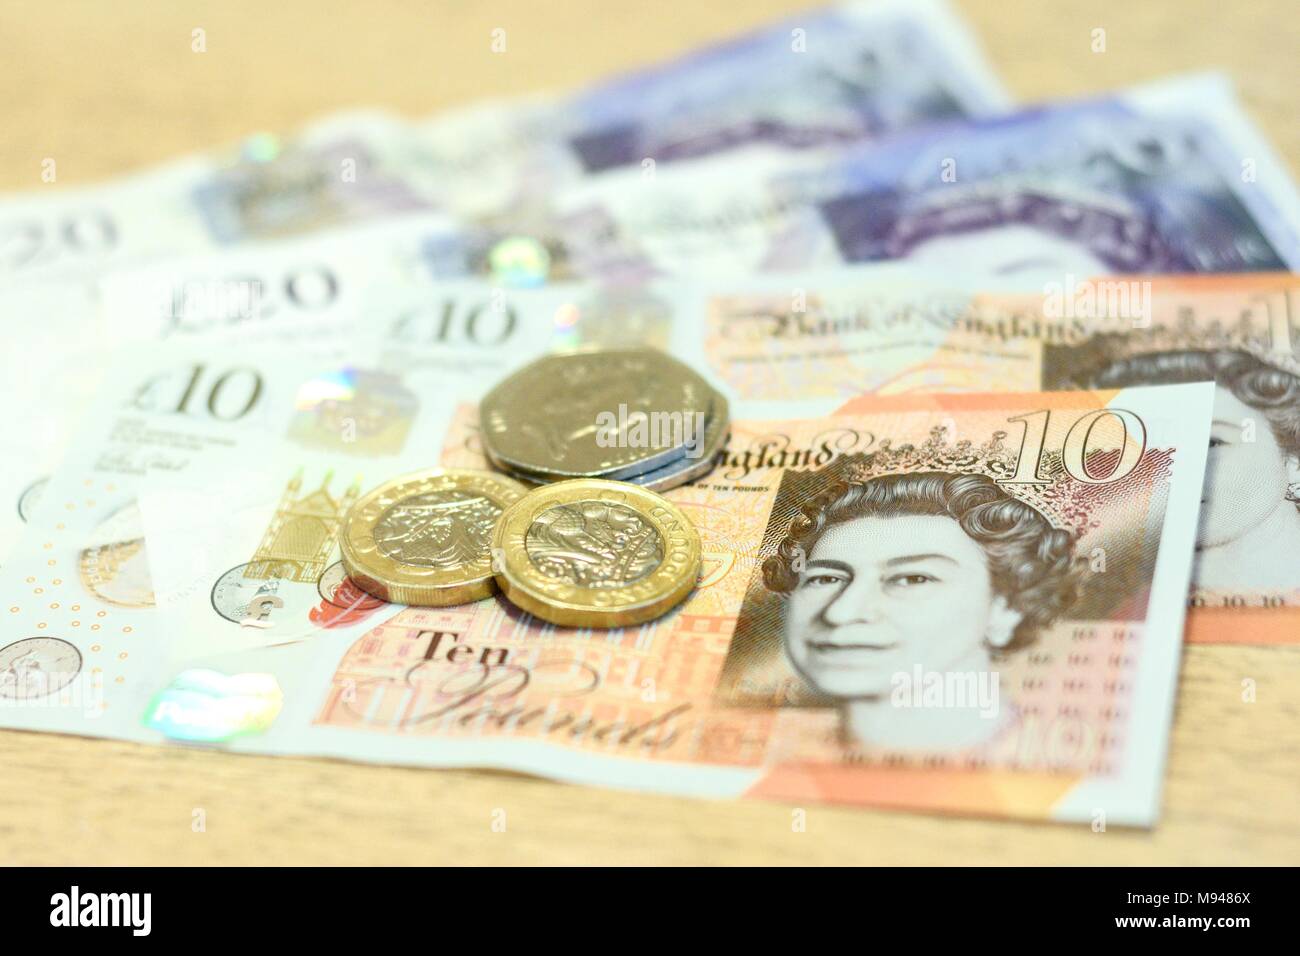 British Pound Coins and bank notes 2018 Stock Photo